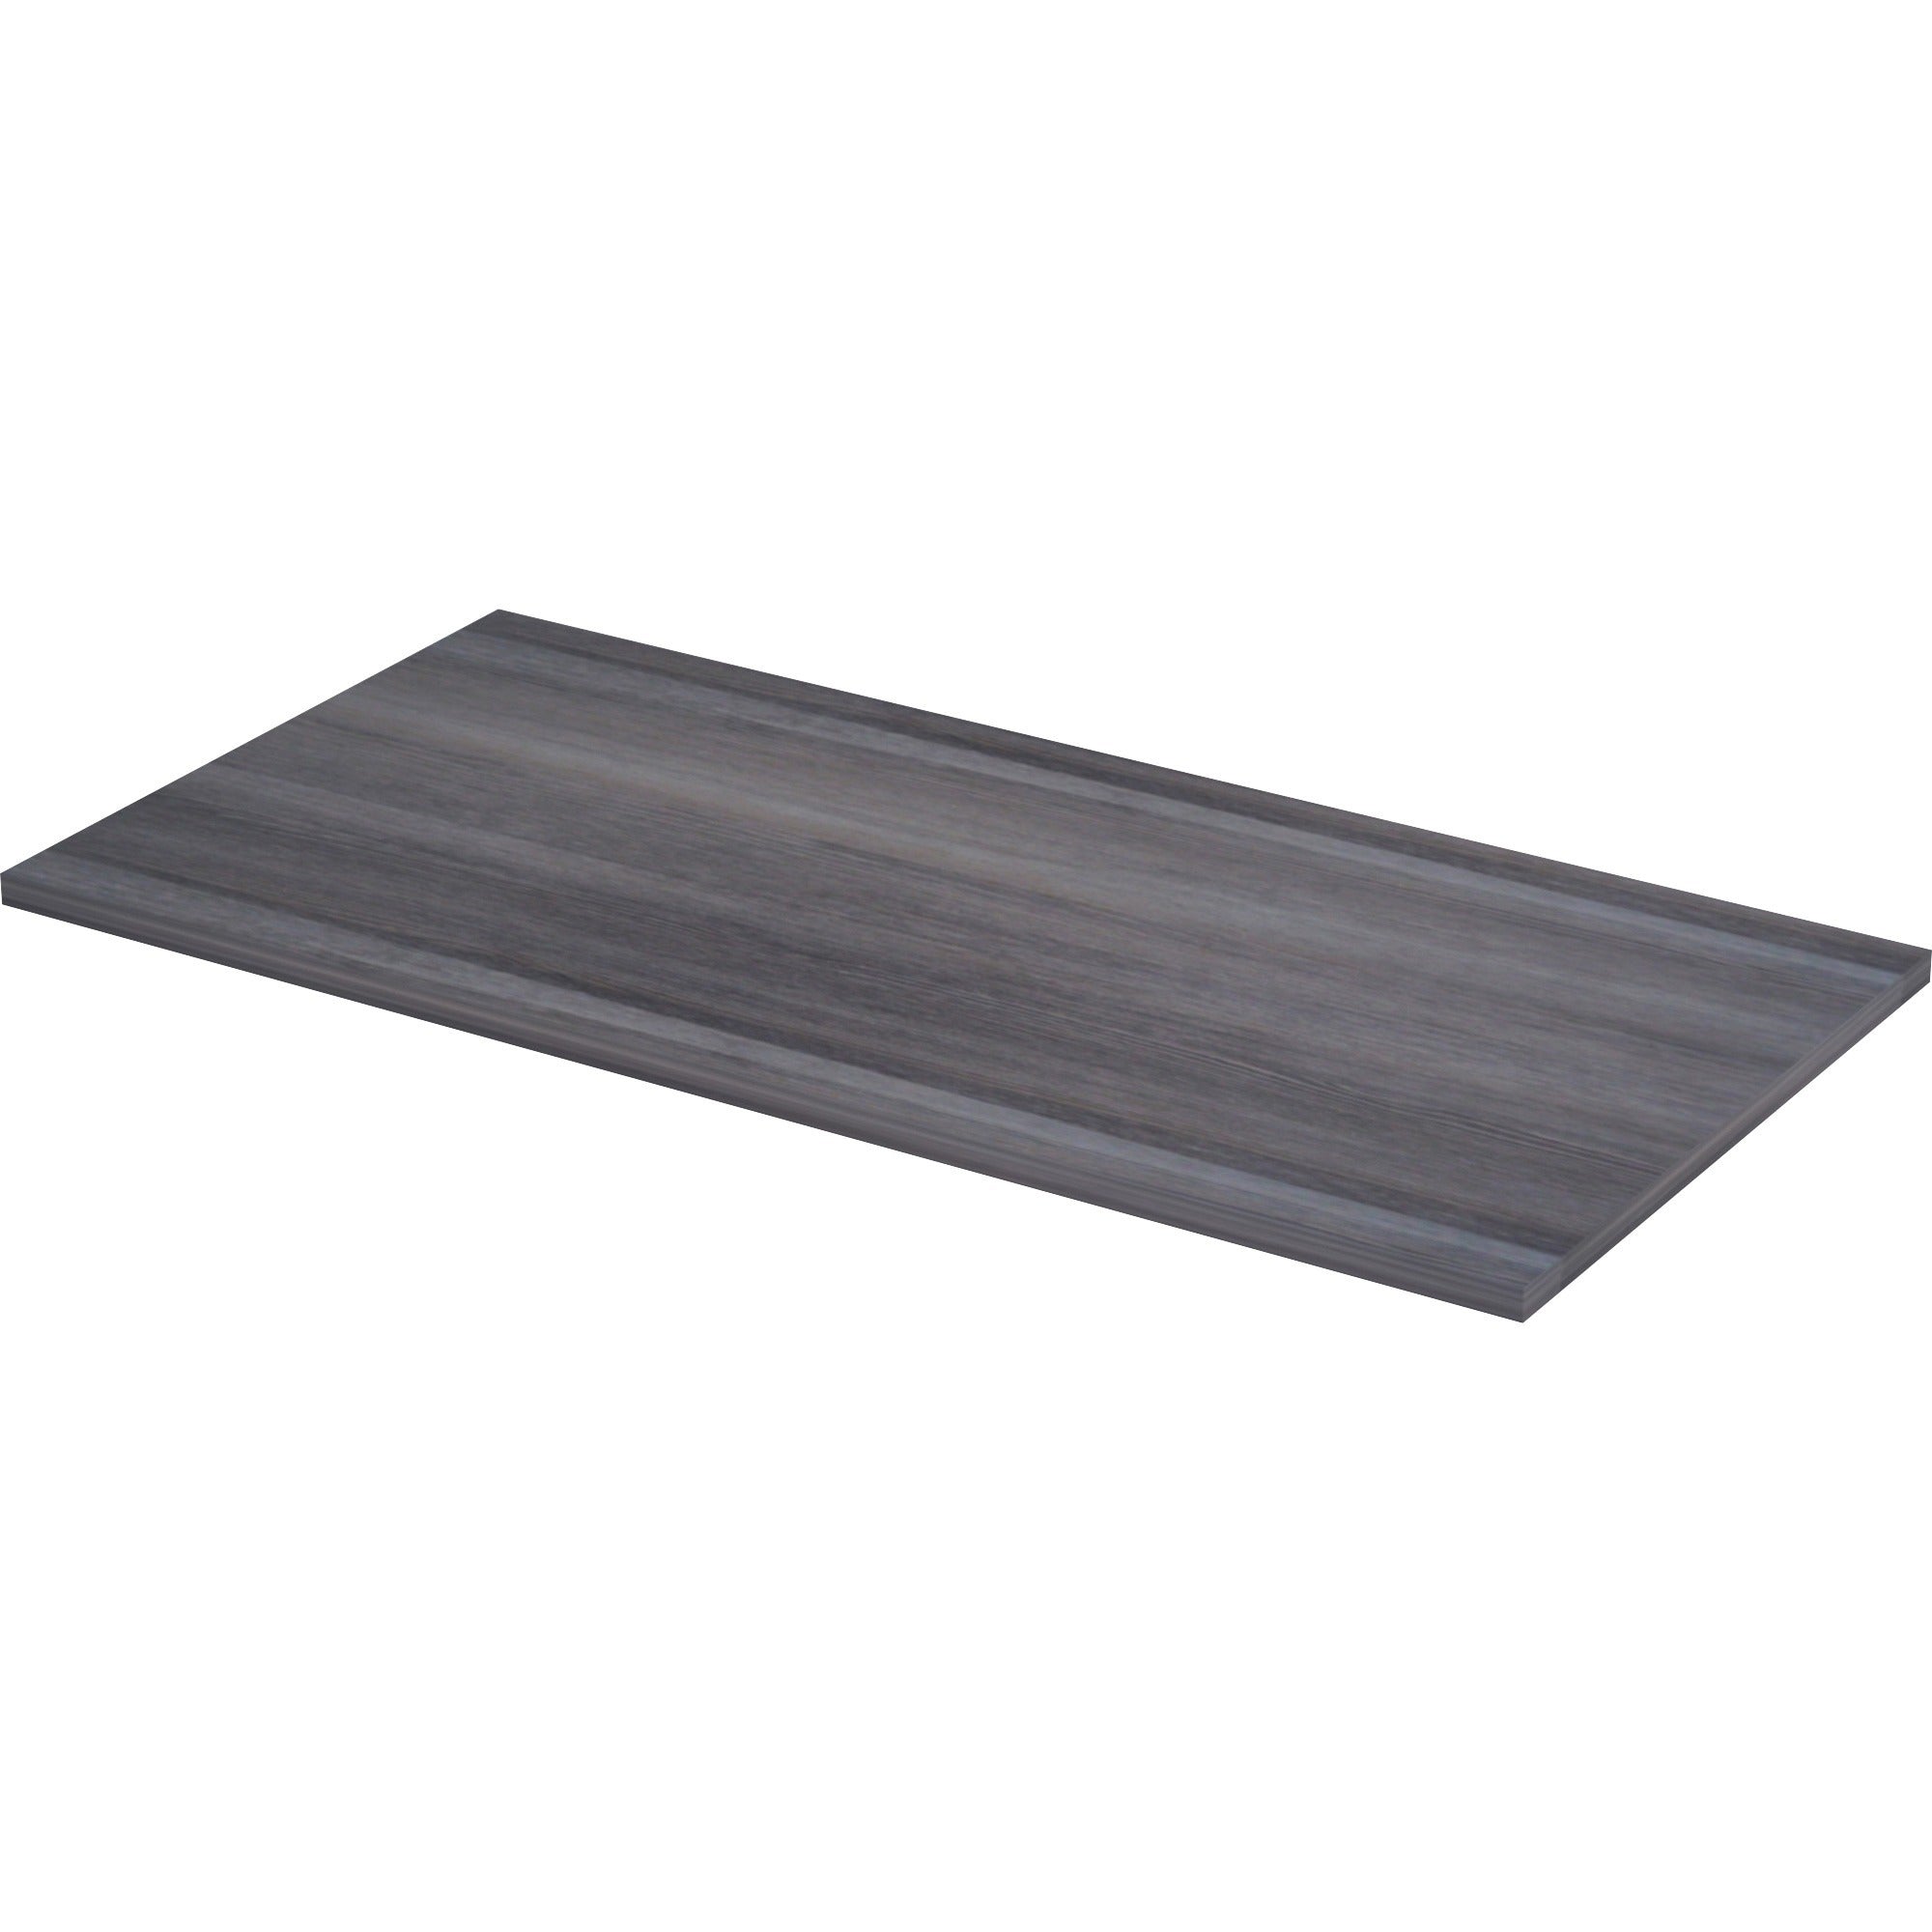 lorell-relevance-series-tabletop-476-x-236-x-1-table-top-straight-edge-finish-charcoal-laminate_llr16203 - 1